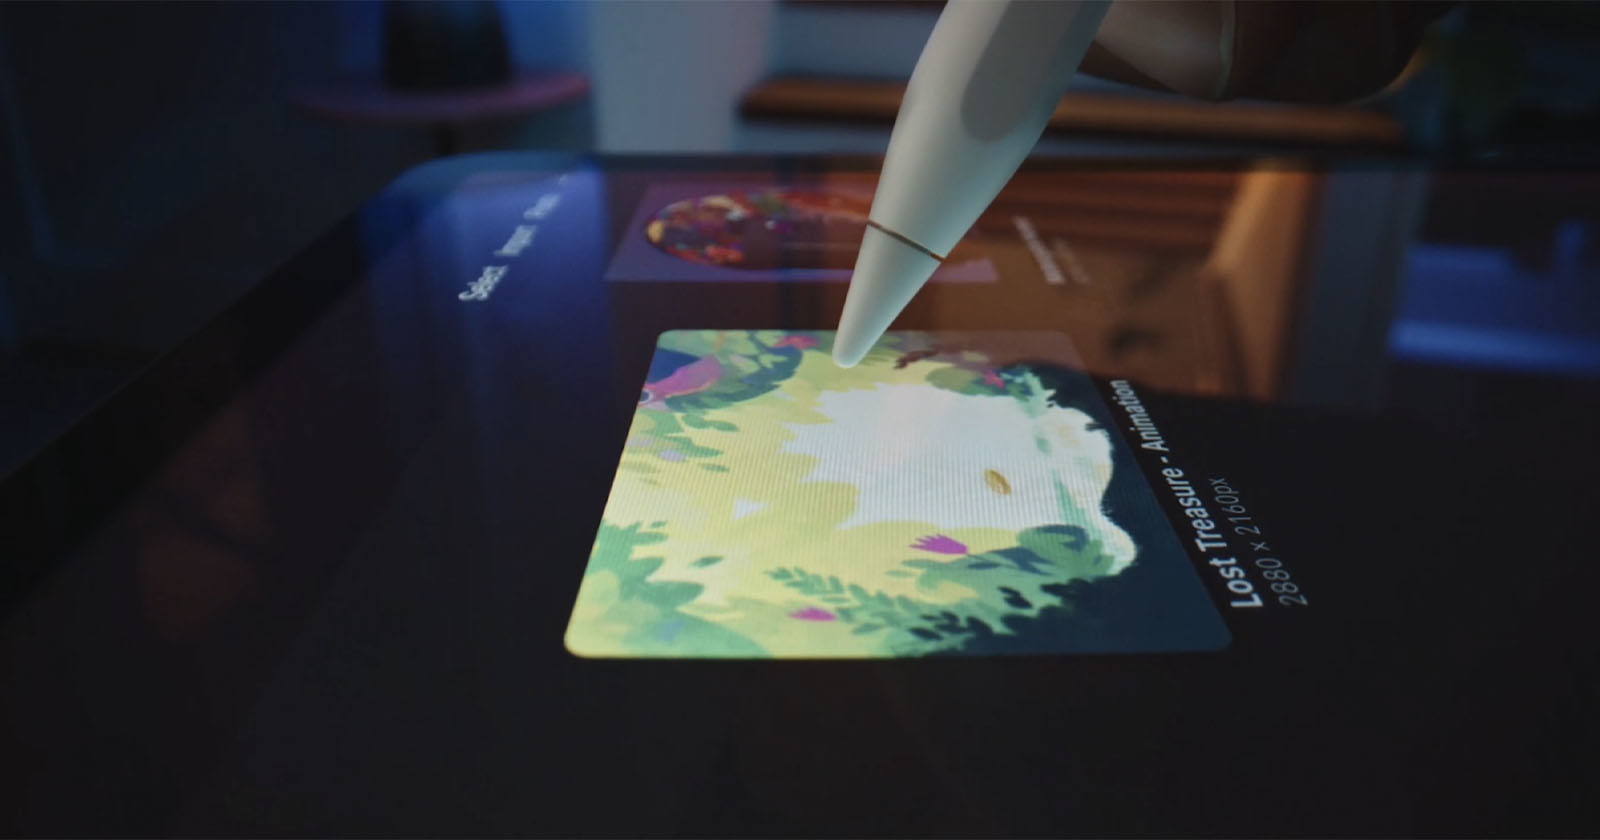 Apple Wants its Pencil to Be Able to Sample Color From Real World Surfaces